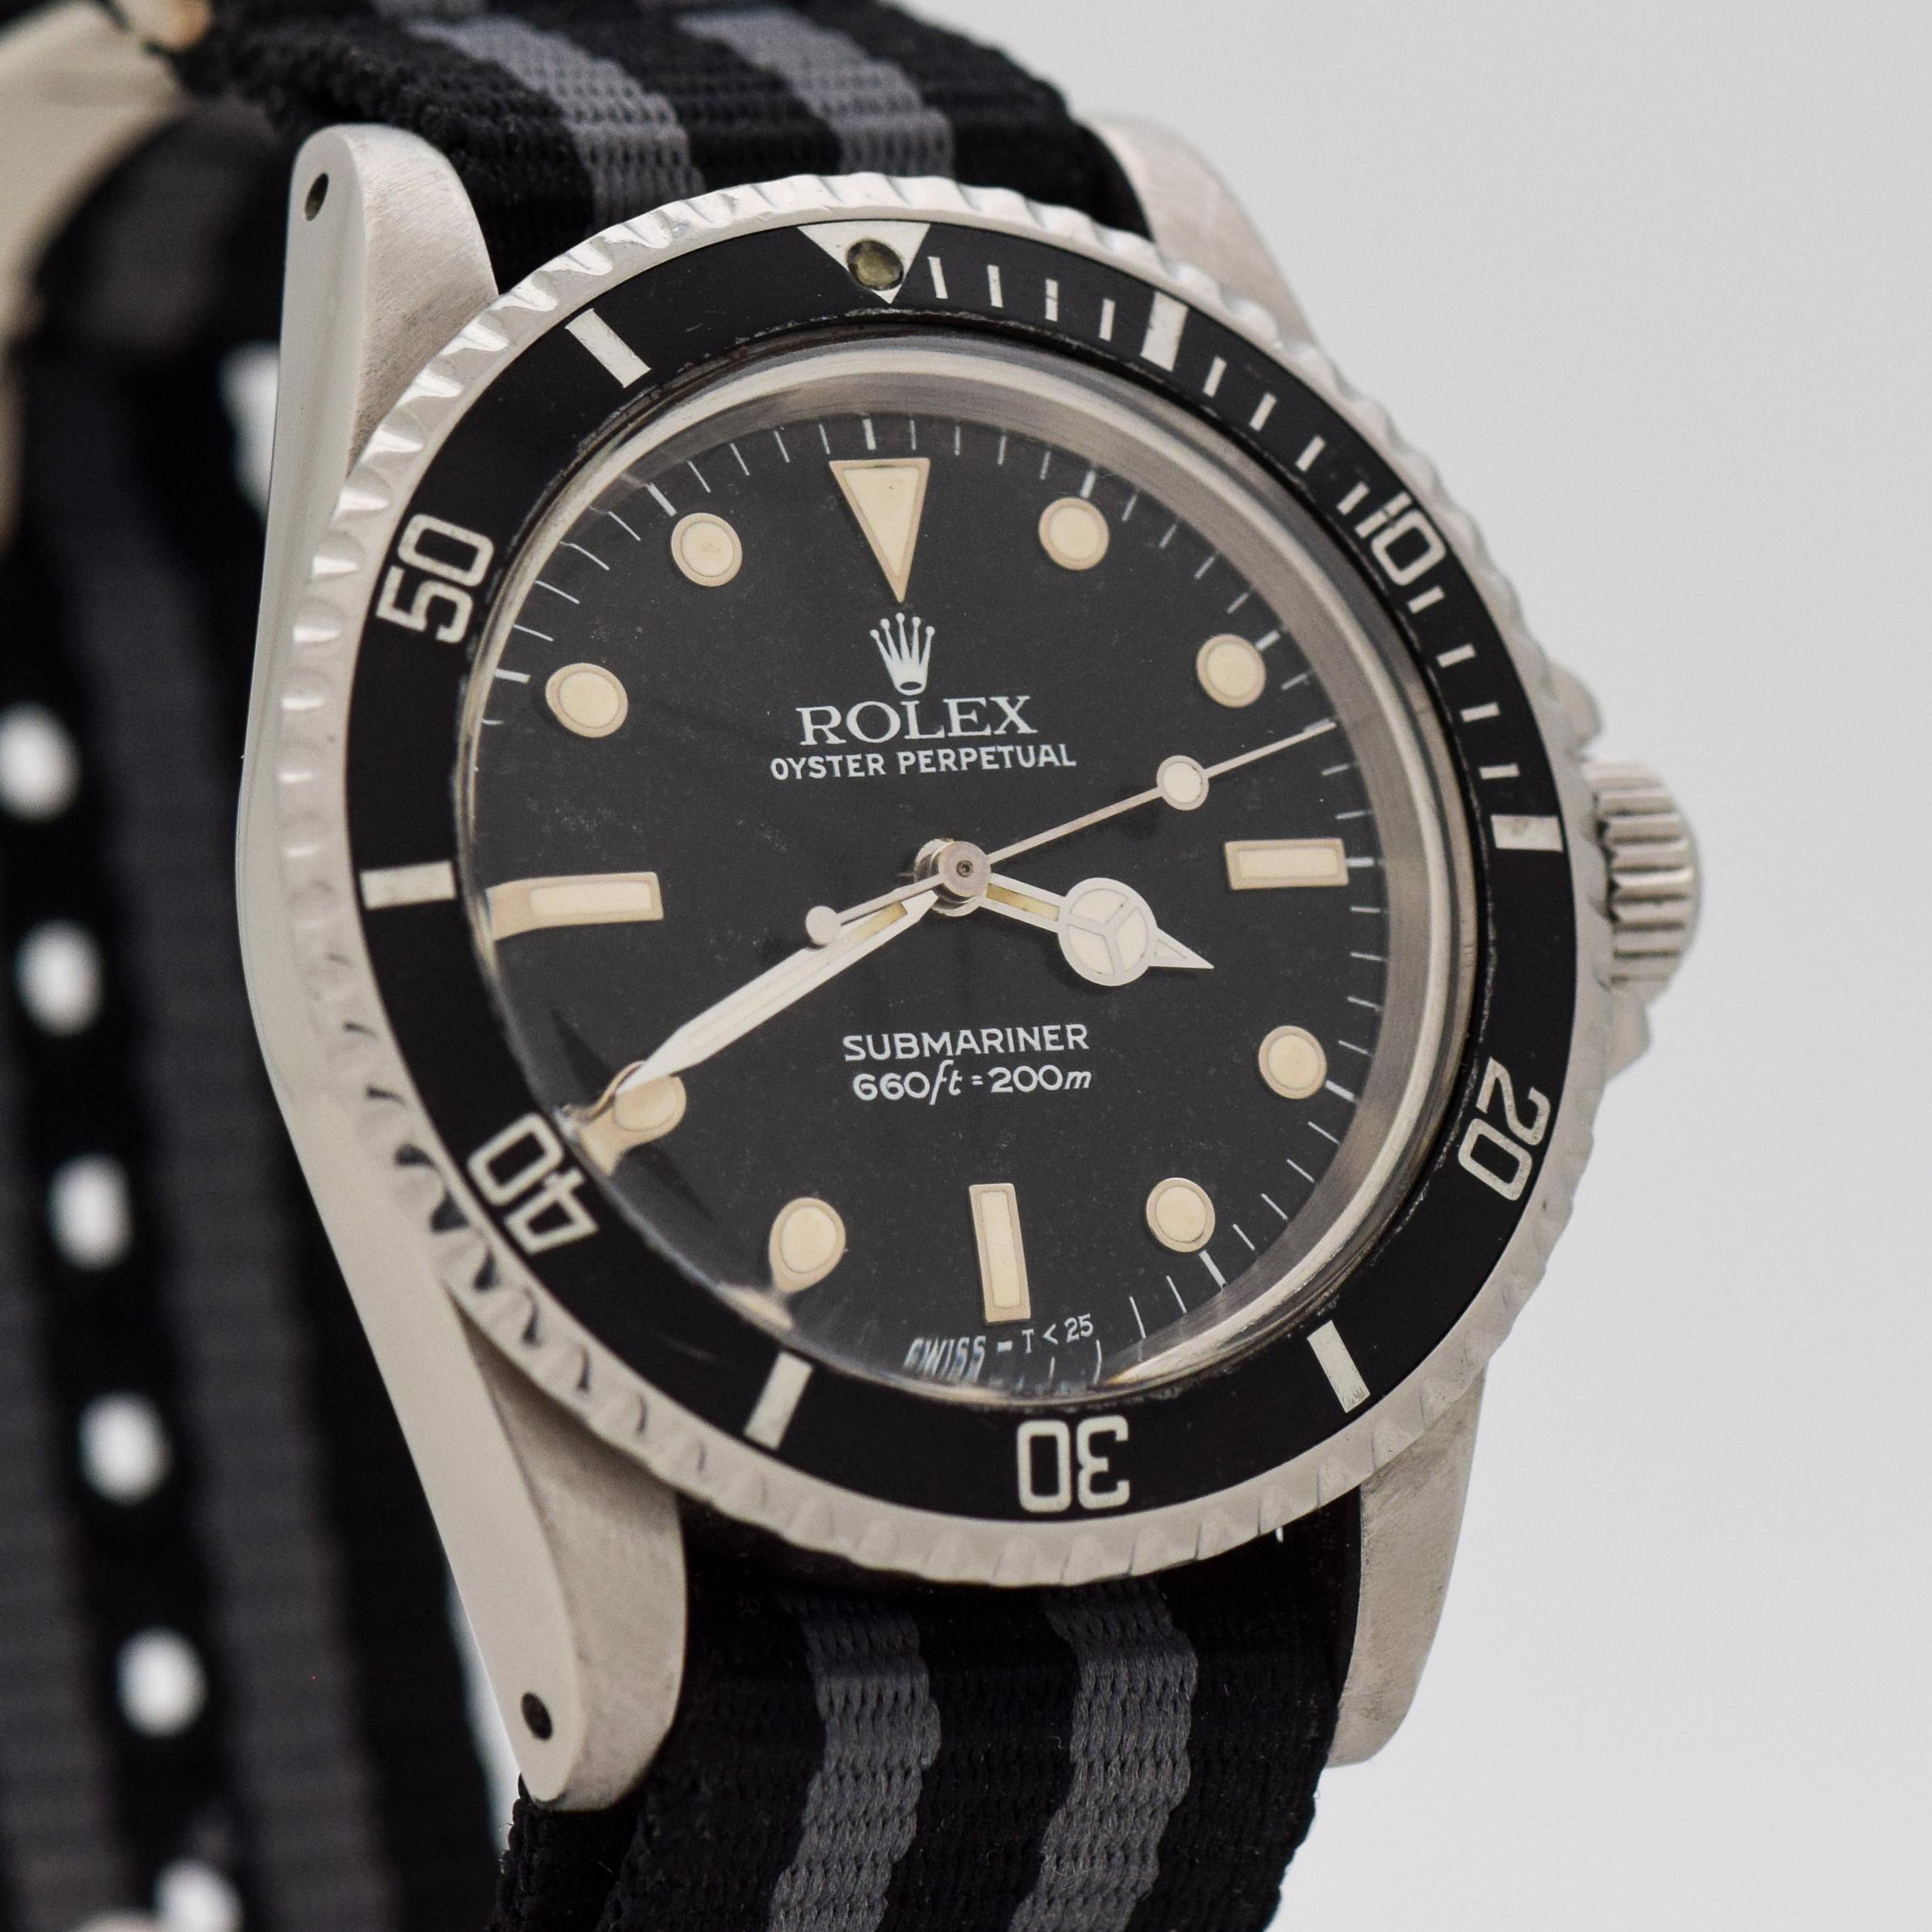 1986 Vintage Rolex Submariner Reference 5513. Stainless Steel case, that measures in at 40mm wide. Original, patinated black dial. Original bezel insert. Powered by a 26-jewel, automatic caliber 1520 movement. Equipped with a two-tone, Black &